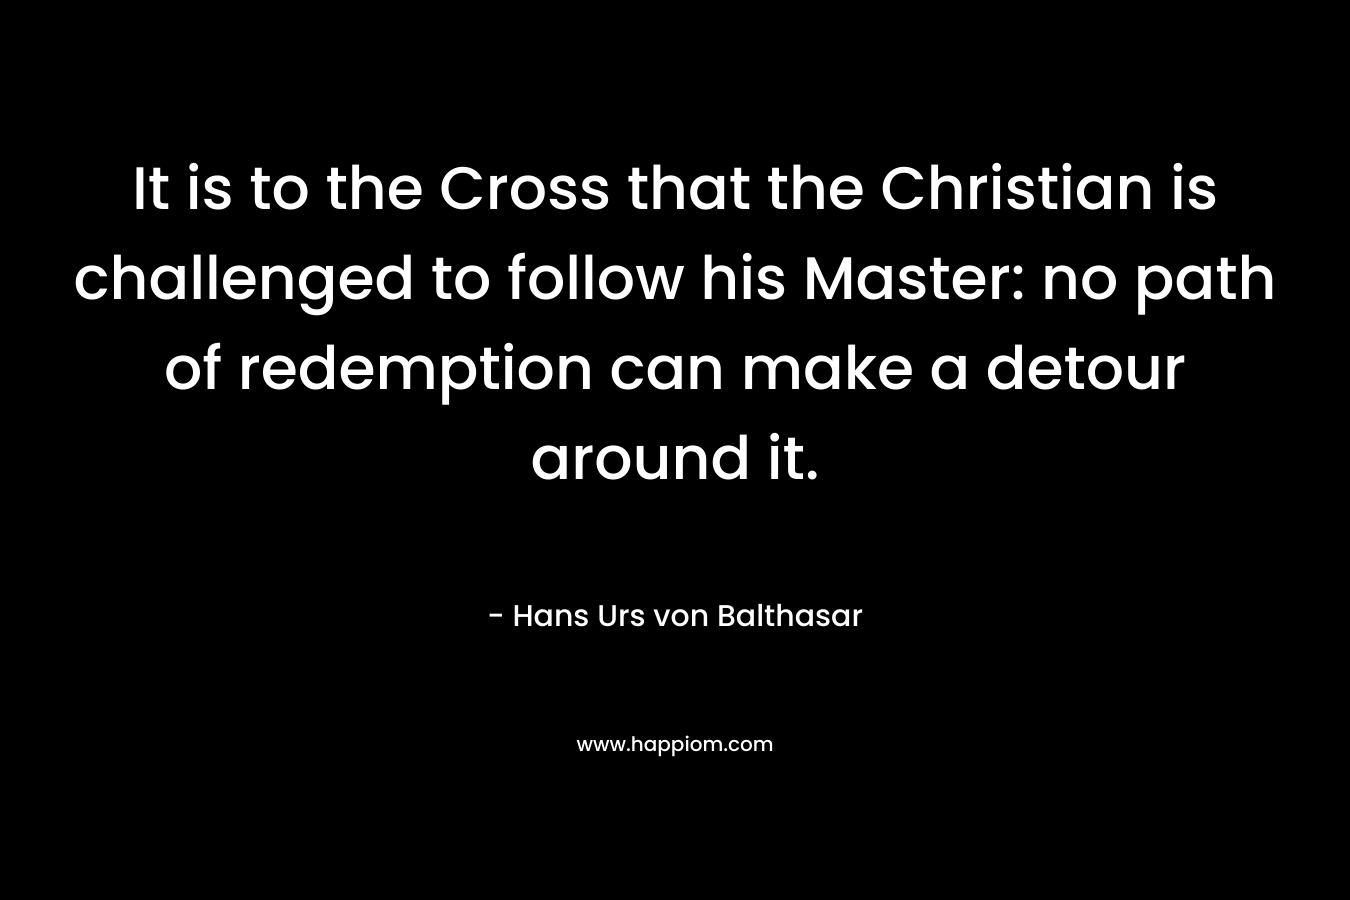 It is to the Cross that the Christian is challenged to follow his Master: no path of redemption can make a detour around it.